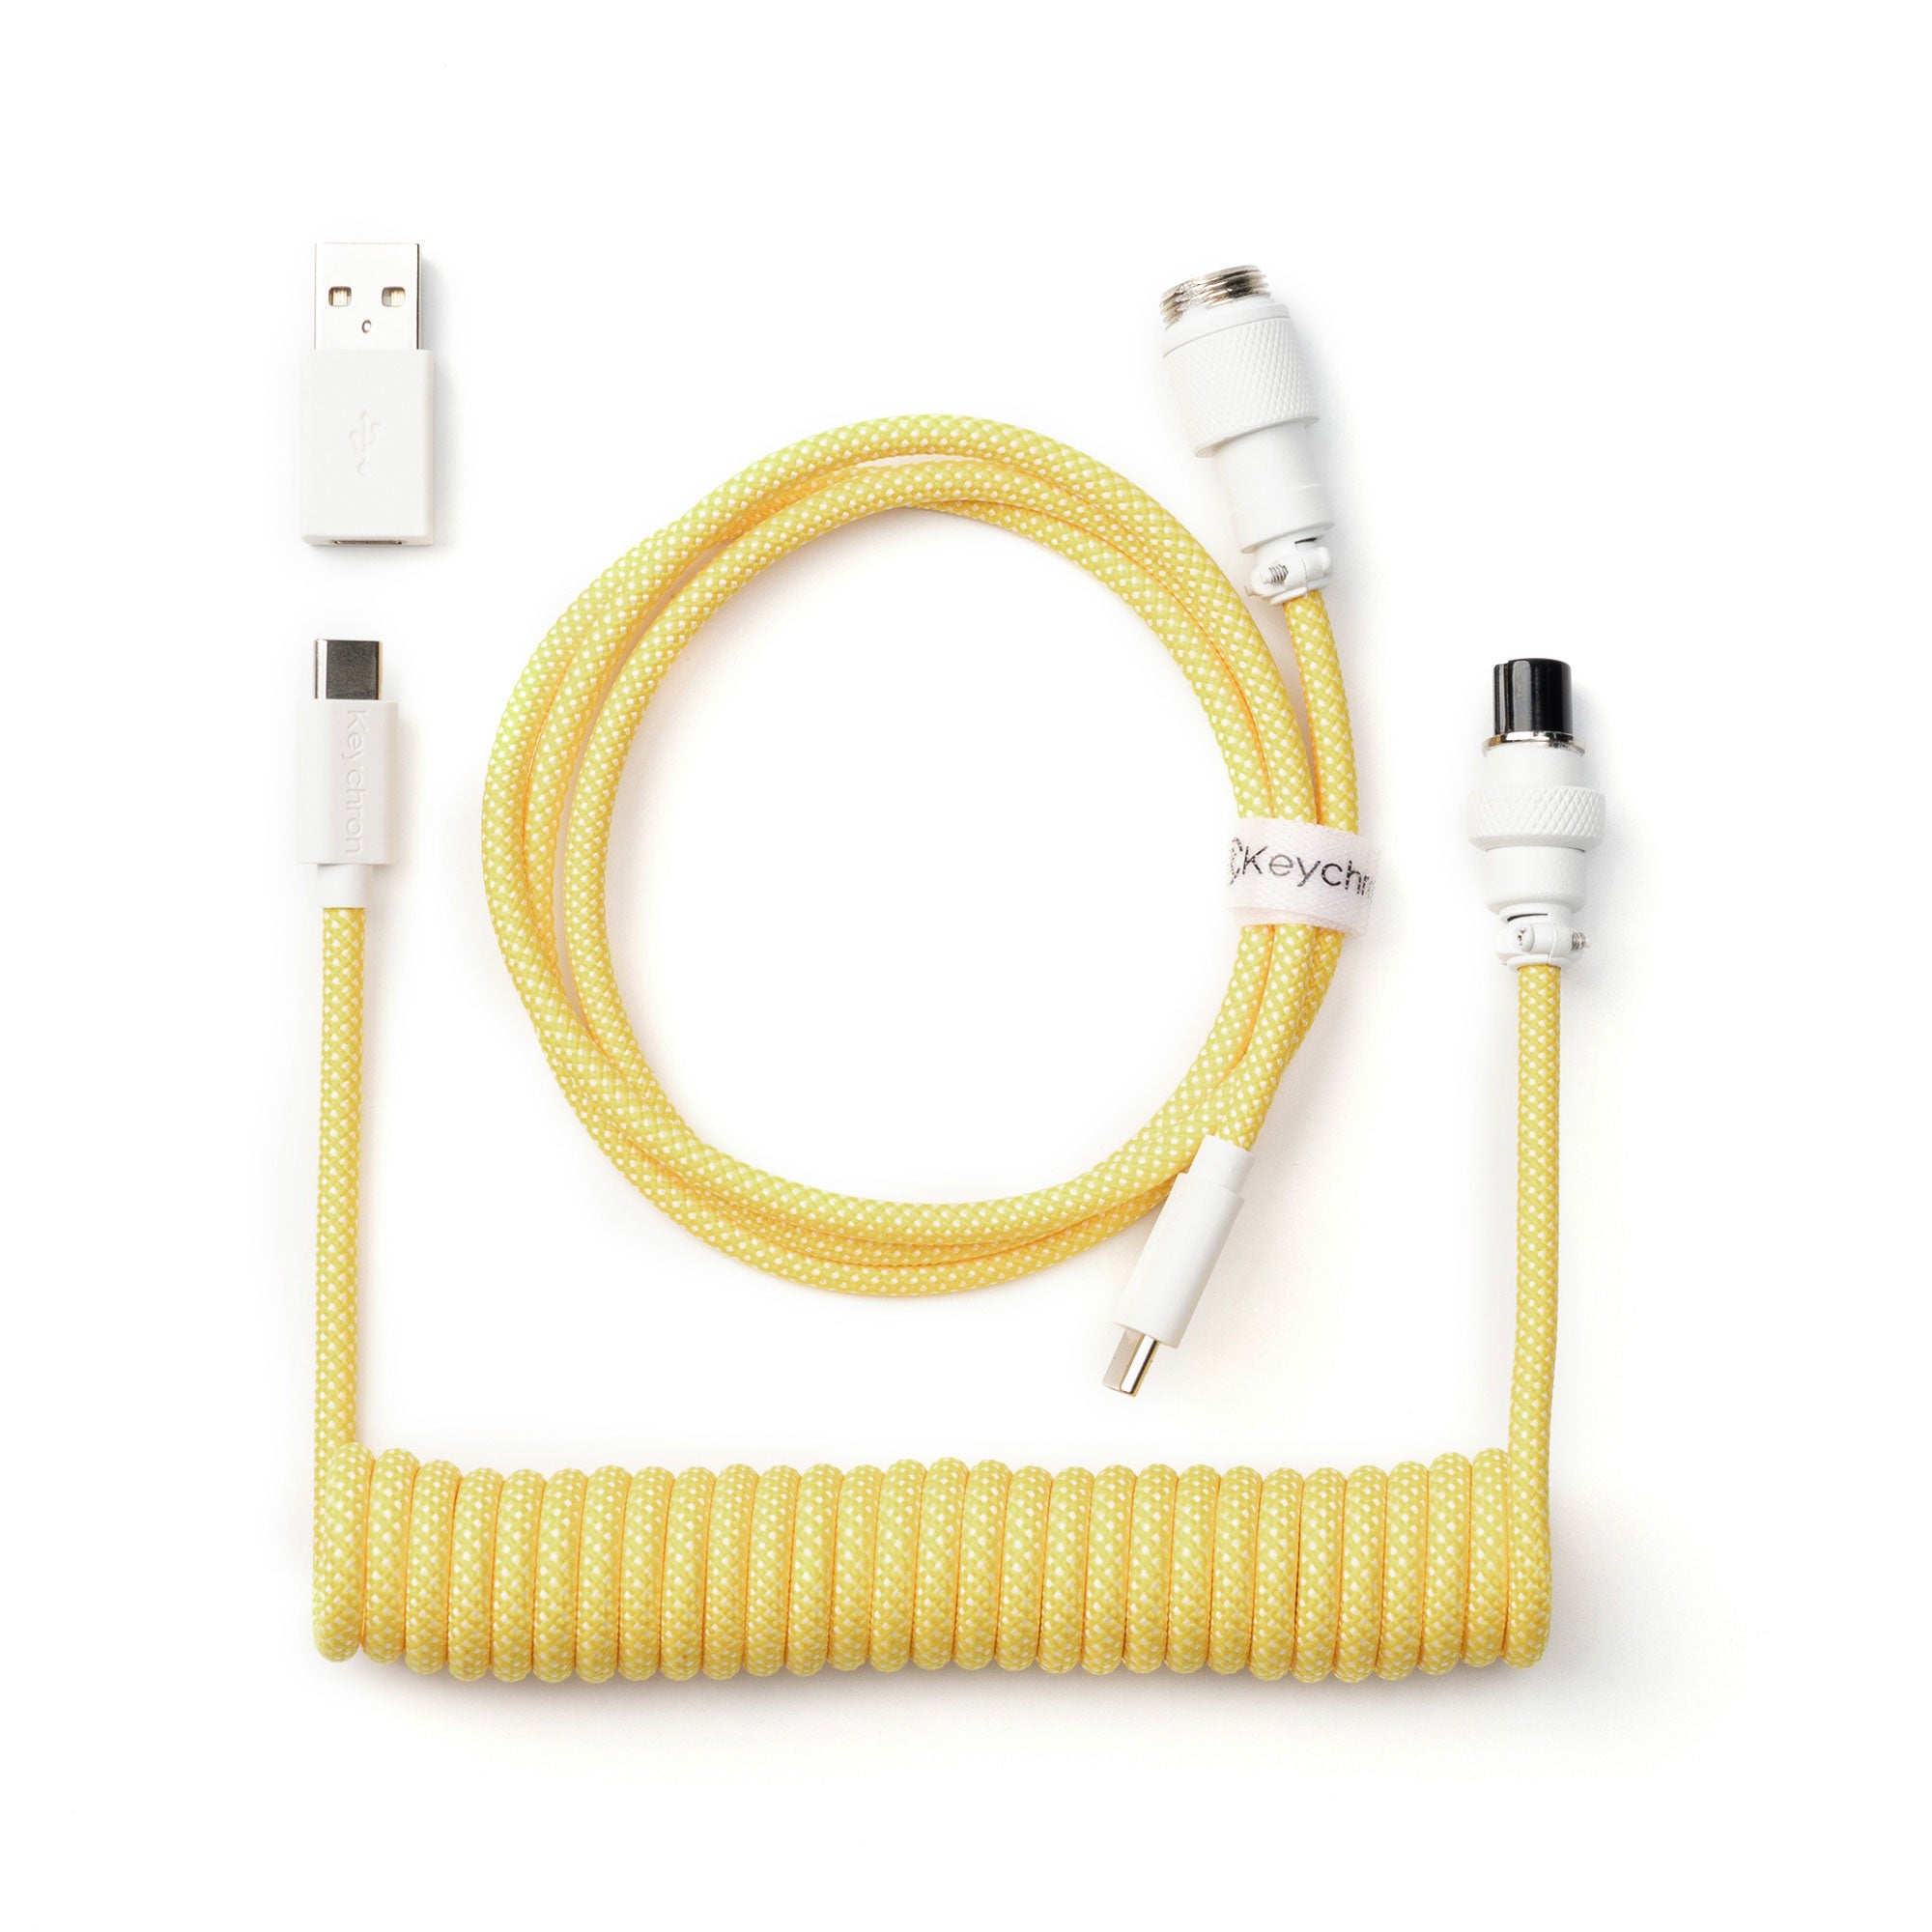 Keychron custom coiled aviator USB type-C cable for keyboards yellow color